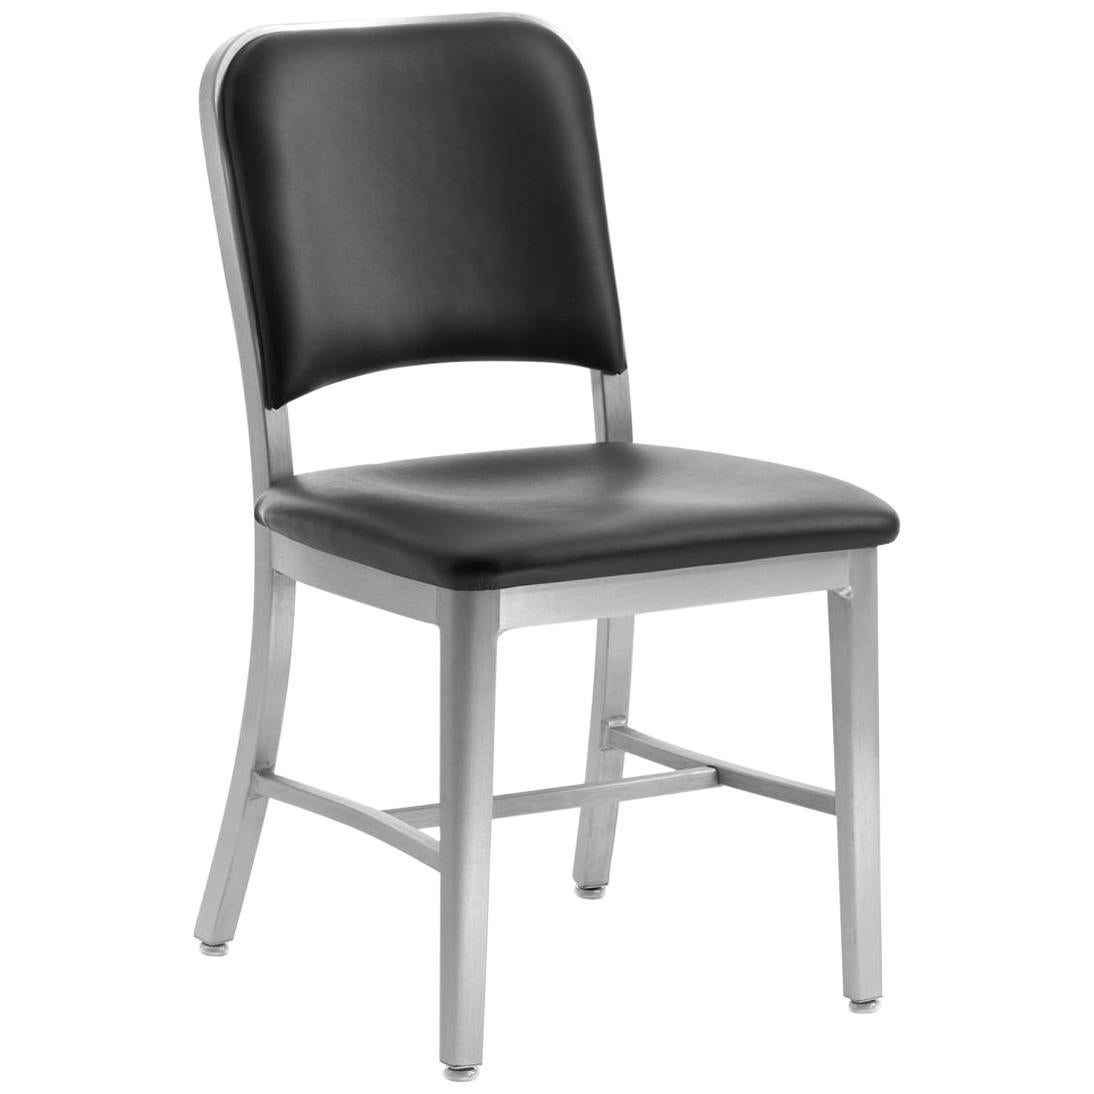 Emeco Navy Chair in Brushed Aluminum and Black Upholstery by US Navy